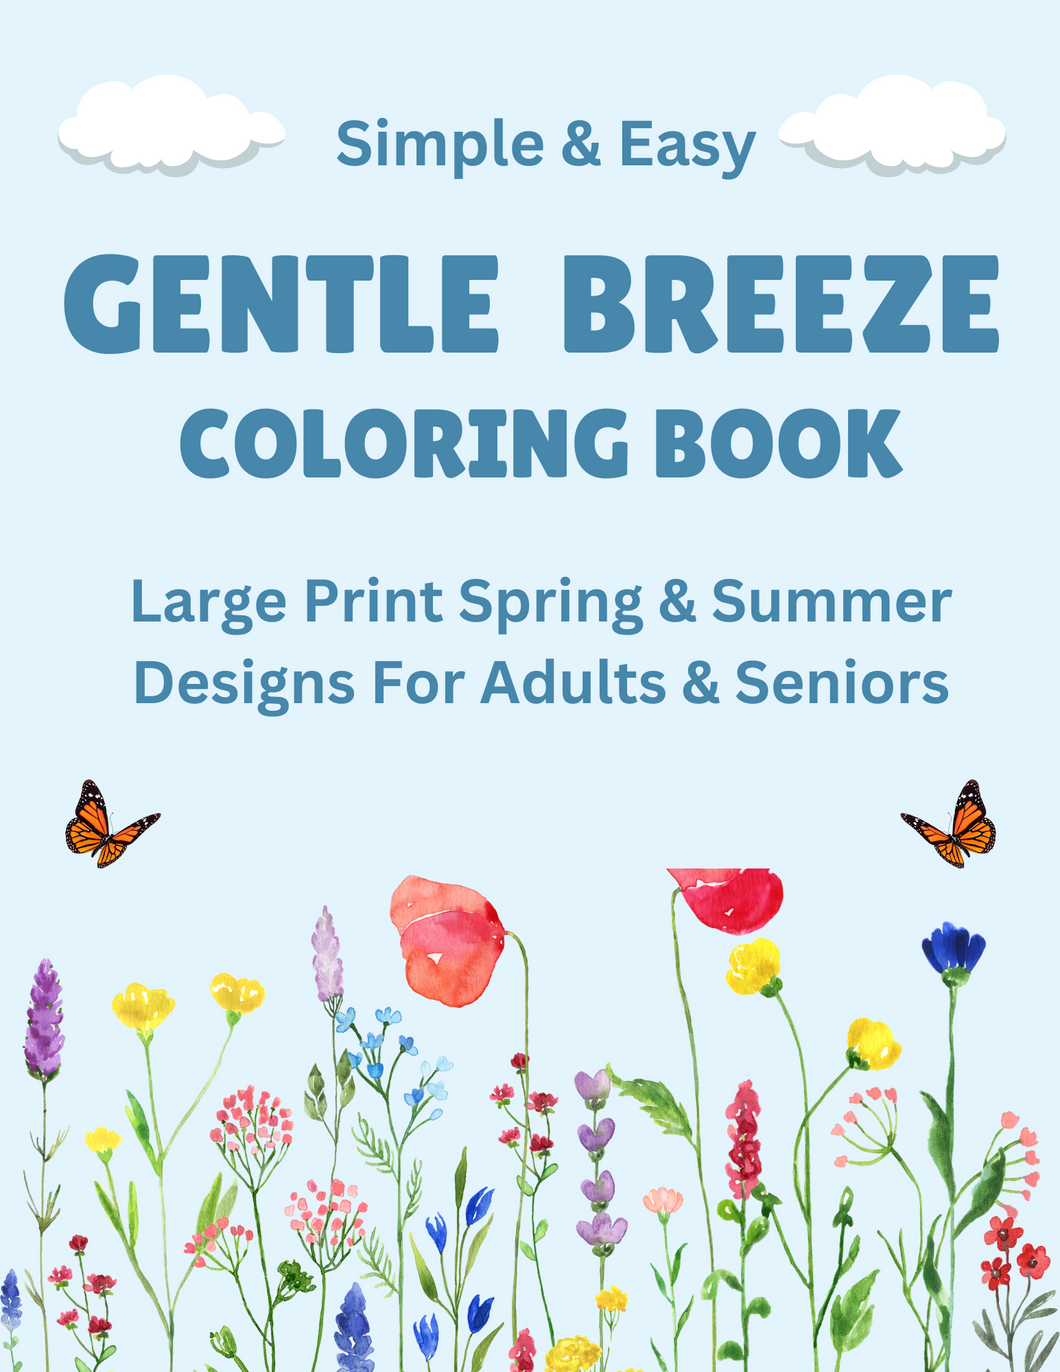 Gentle Breeze Simple & Easy Large Print Coloring Book for Adults & Seniors